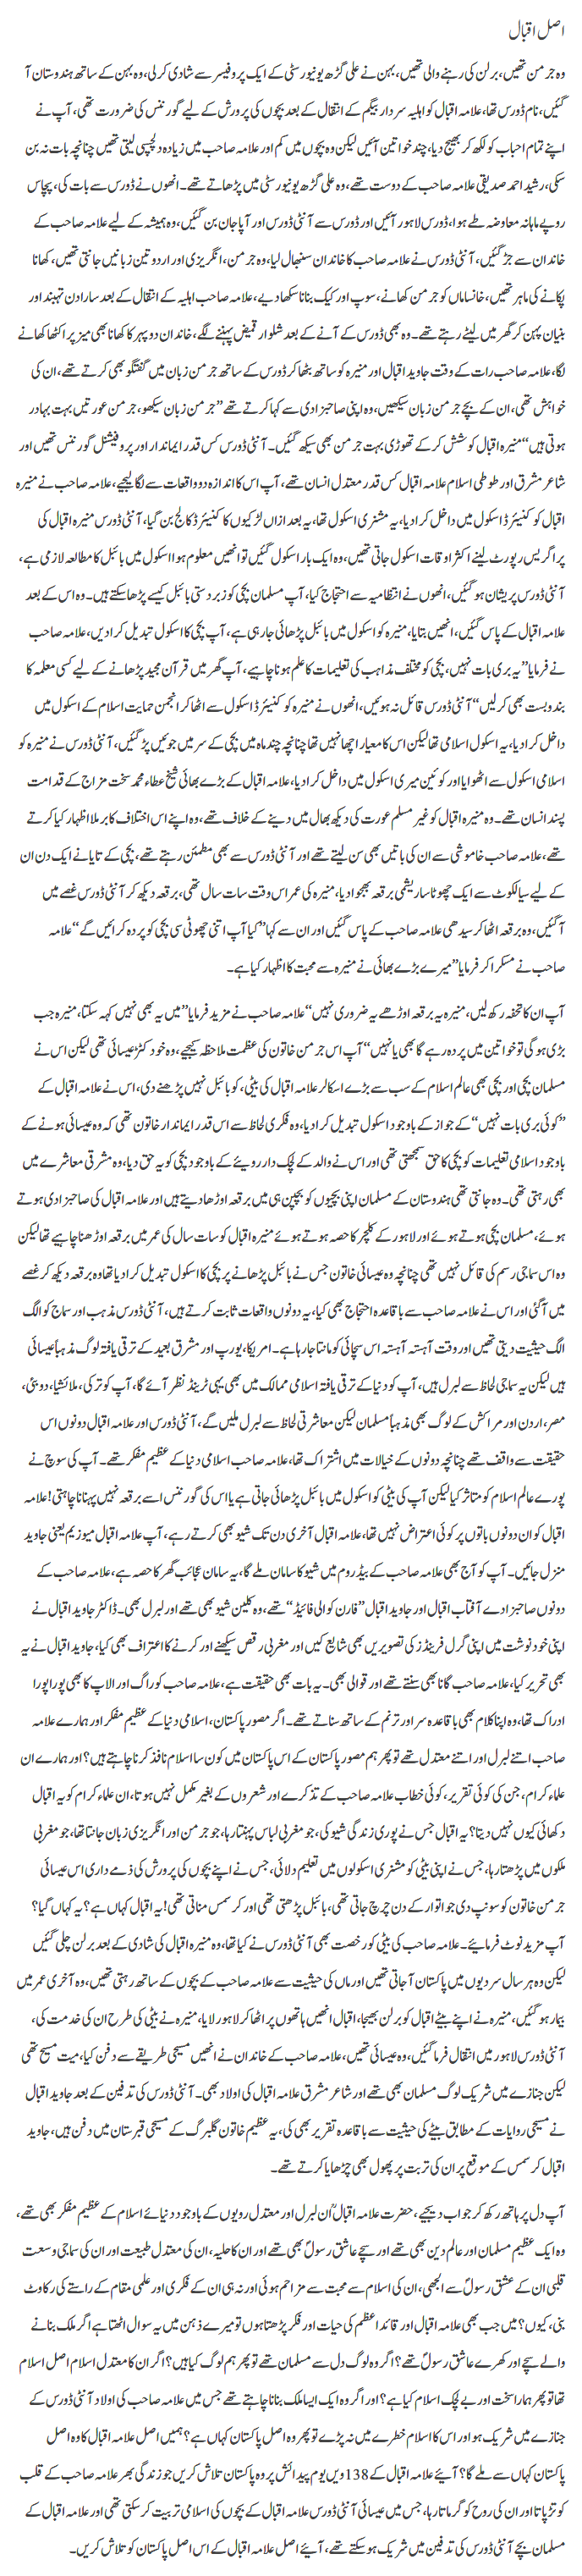 Asal Iqbal By Javed Chaudhry